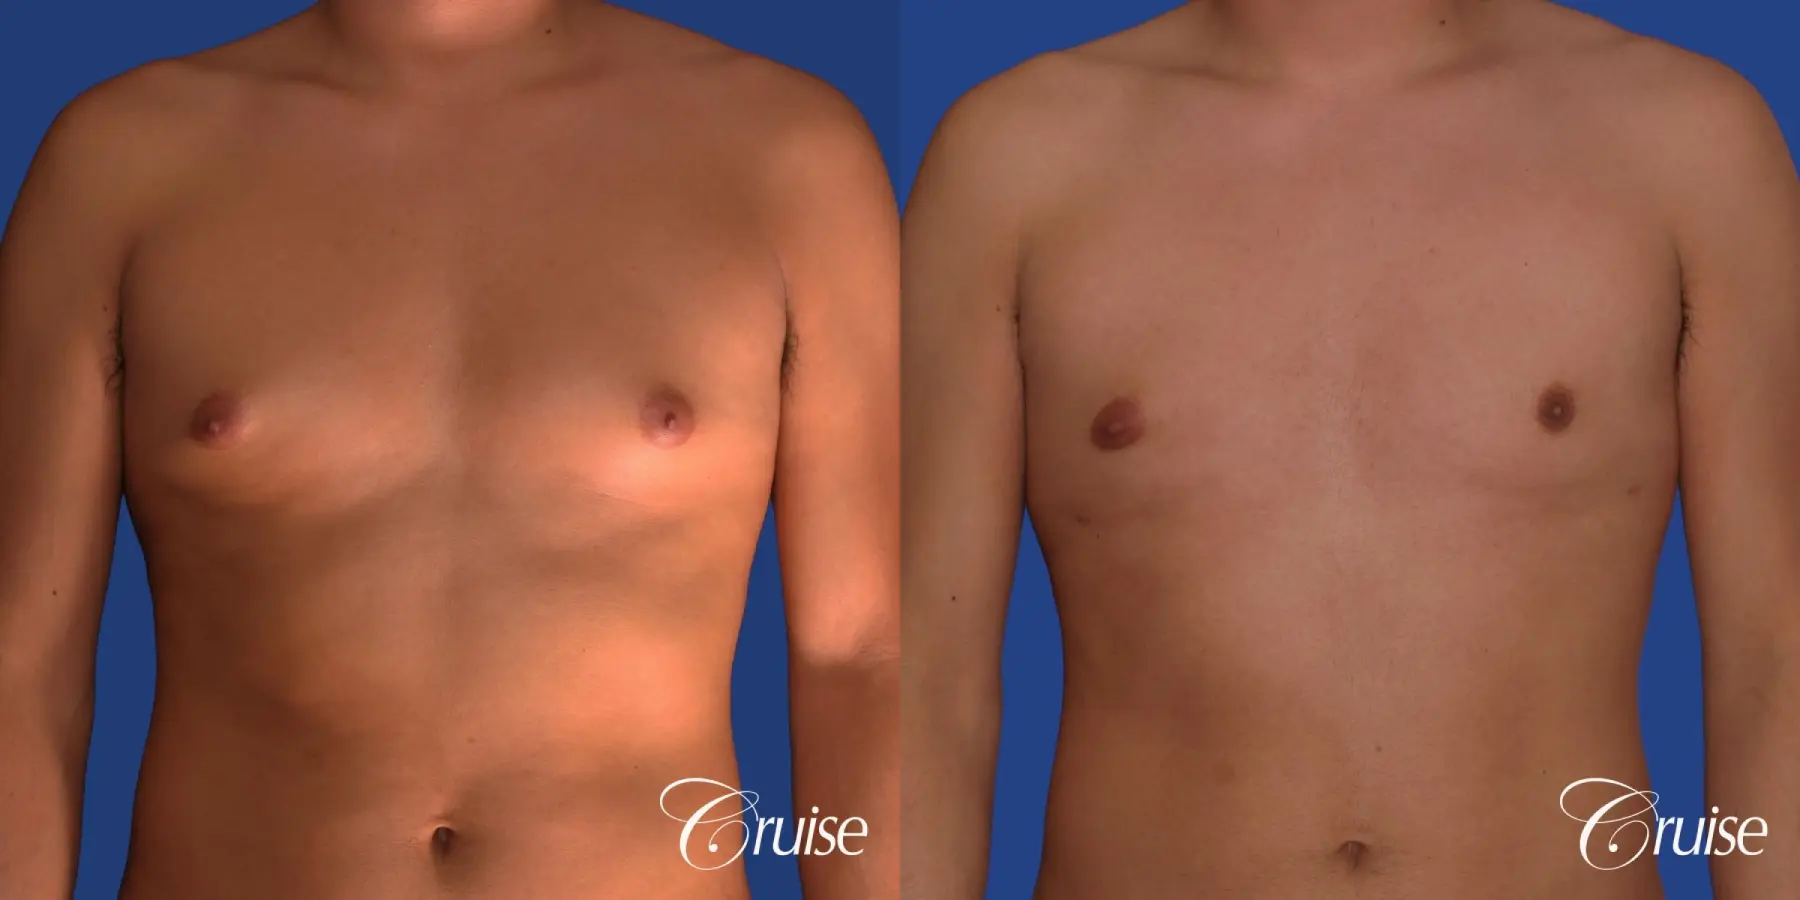 best gynecomastia results with gynecomastia plastic surgeon - Before and After 1